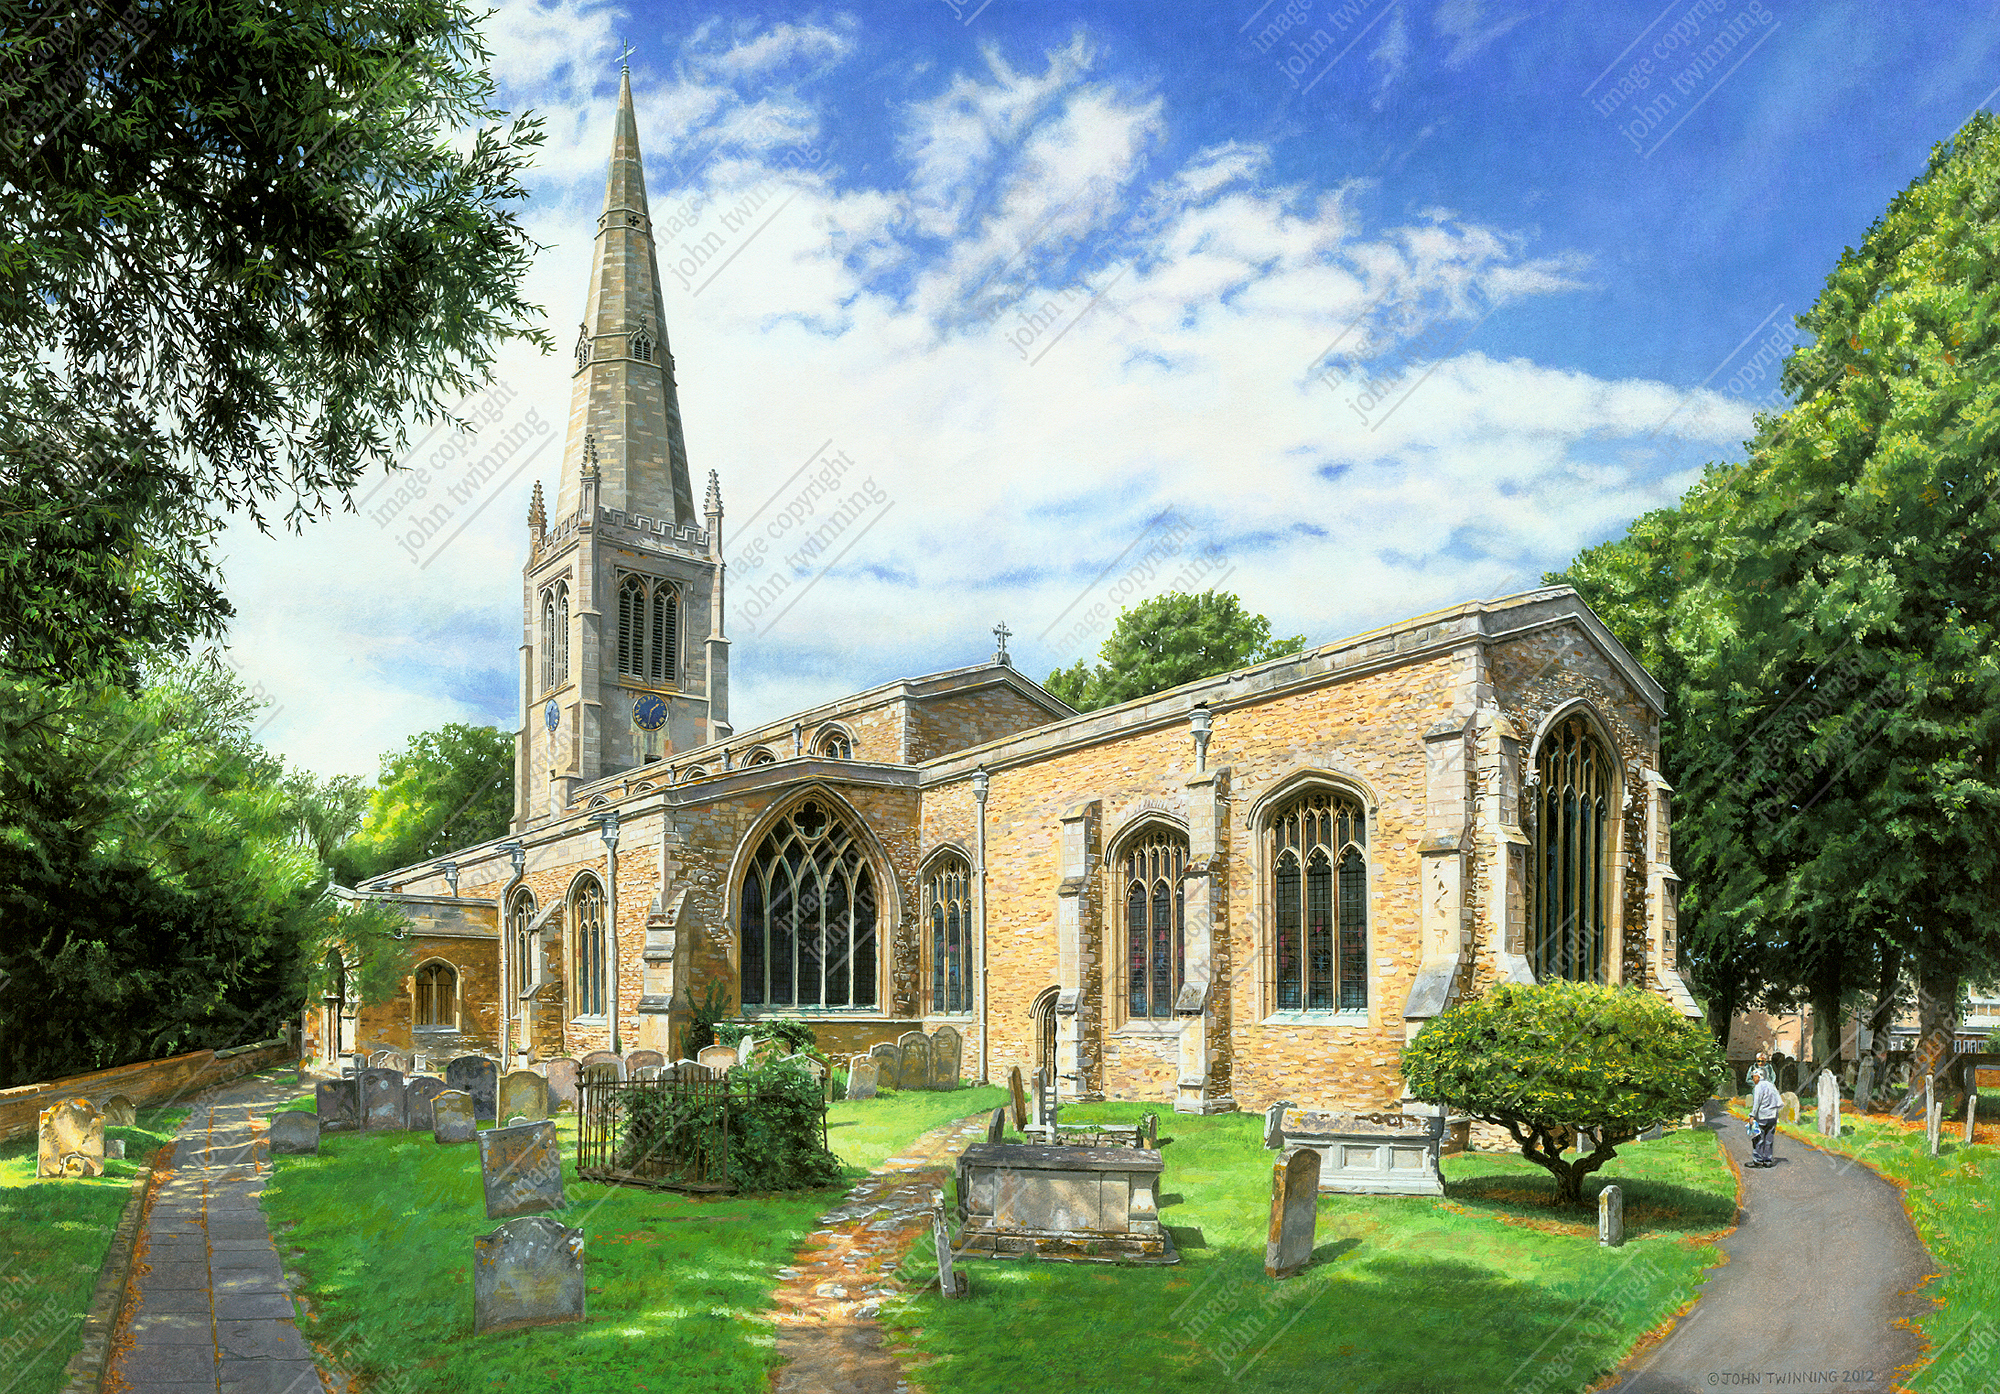 ‘All Saints, The Parish Church Of St. Ives, Cambridgeshire’ – art print from a commissioned painting of this town centre church